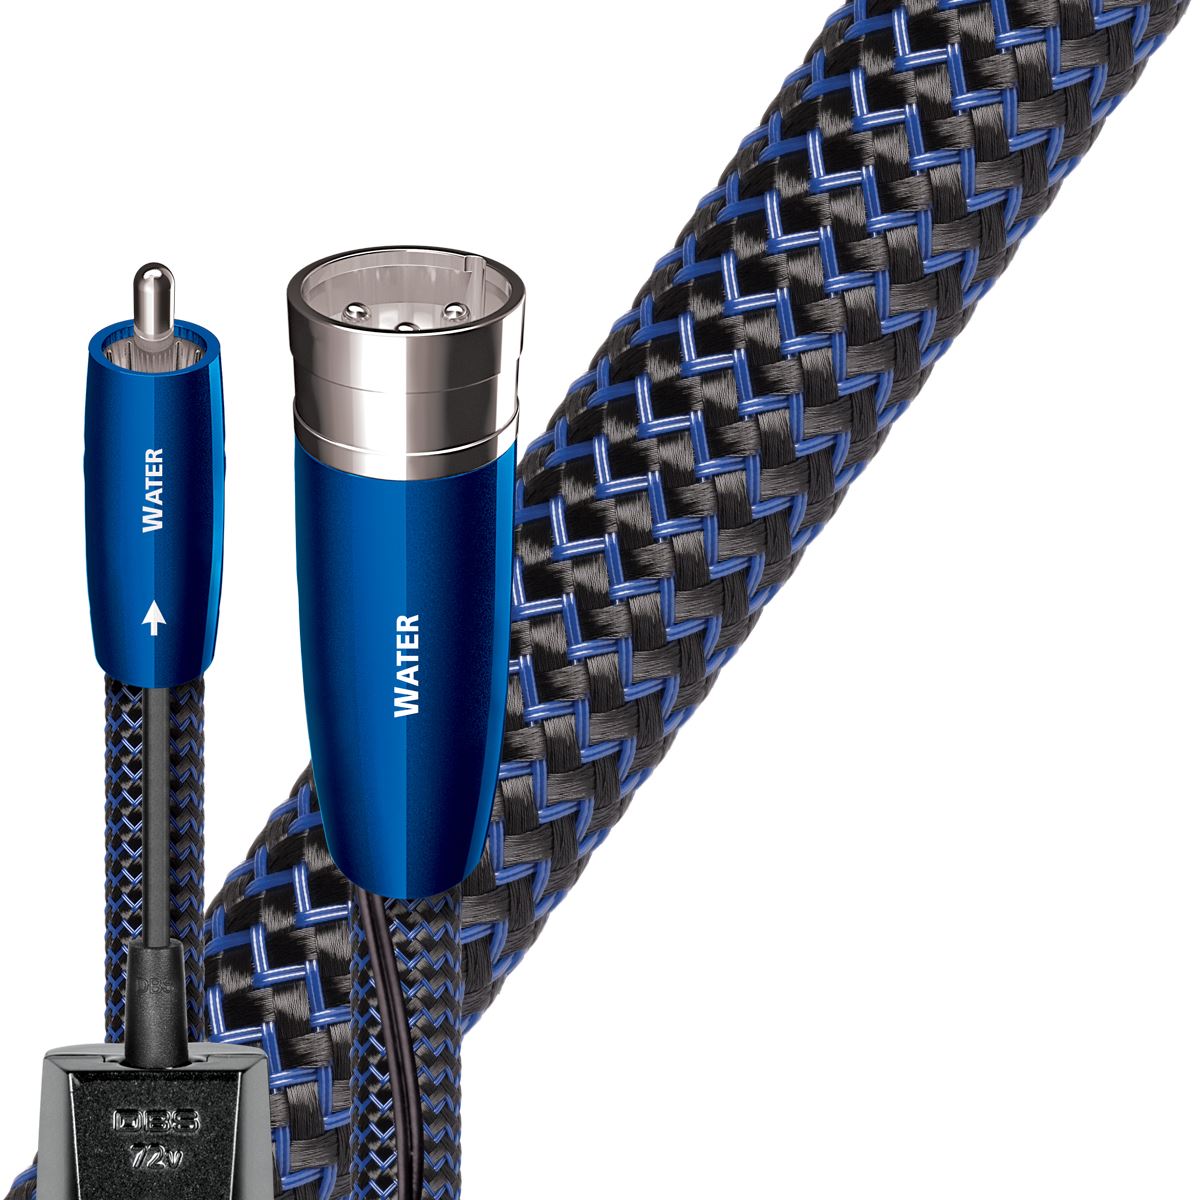 AUDIOQUEST_Water_.5M_XLR_to_XLR_pair._Solid_perfect_surface_copper_plus._Triple_balanced._Polyethylene_air-tubes._Cold-welded,silver_over_copper_TER_Jacket_-_blue_-_black_braid 2056